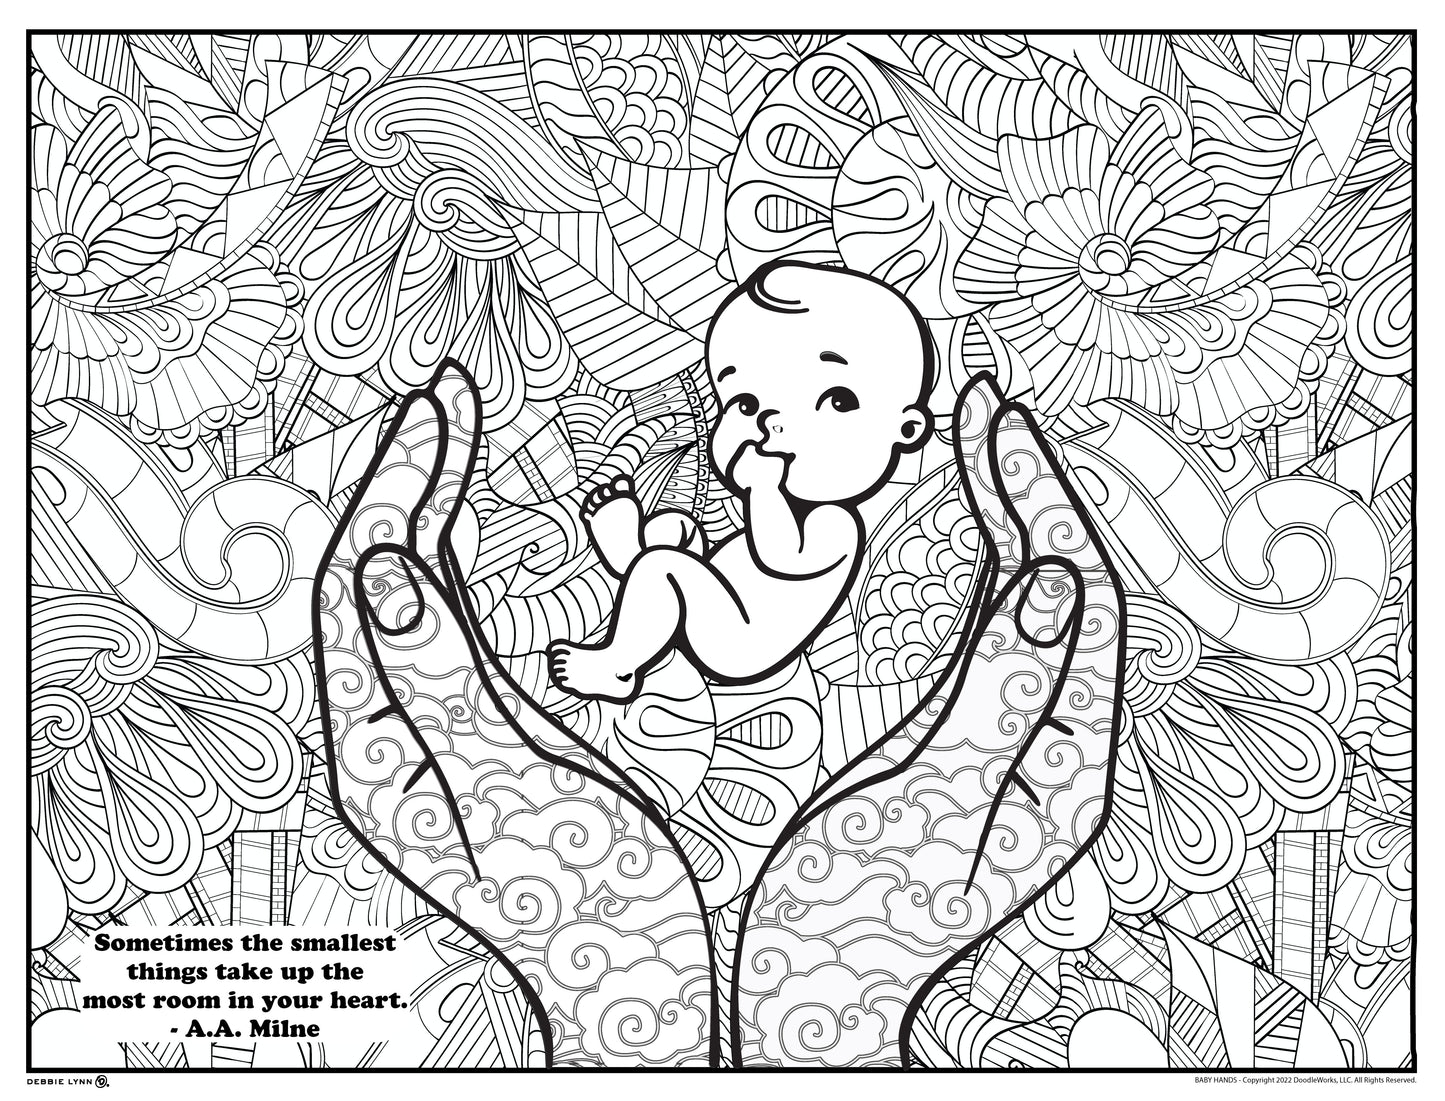 Baby Hands Personalized Giant Coloring Poster 46" x 60"